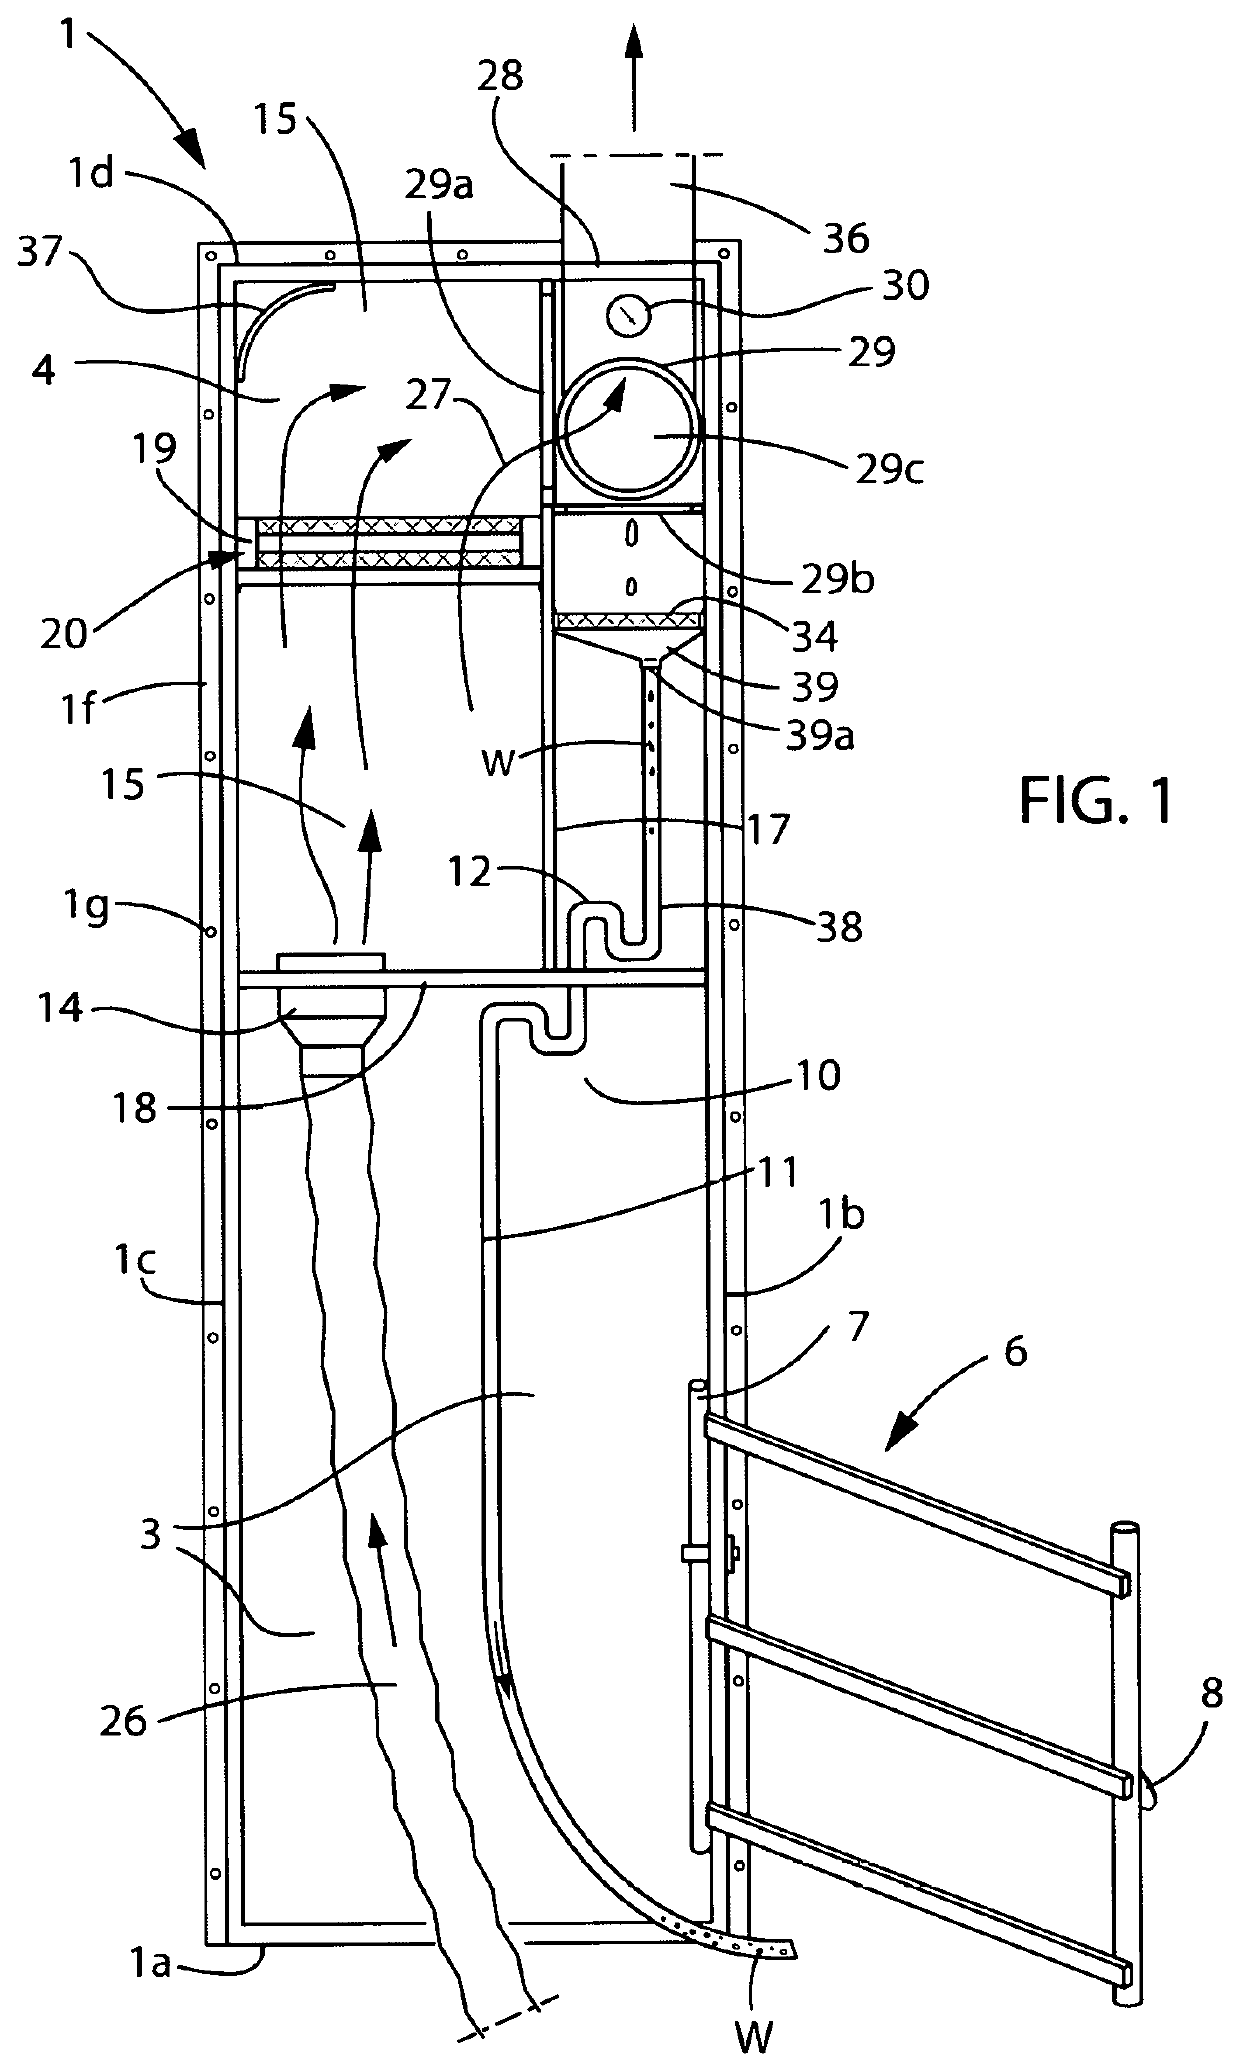 Condensate and lint separator within a gaseous fluid exhaust system of a clothes dryer